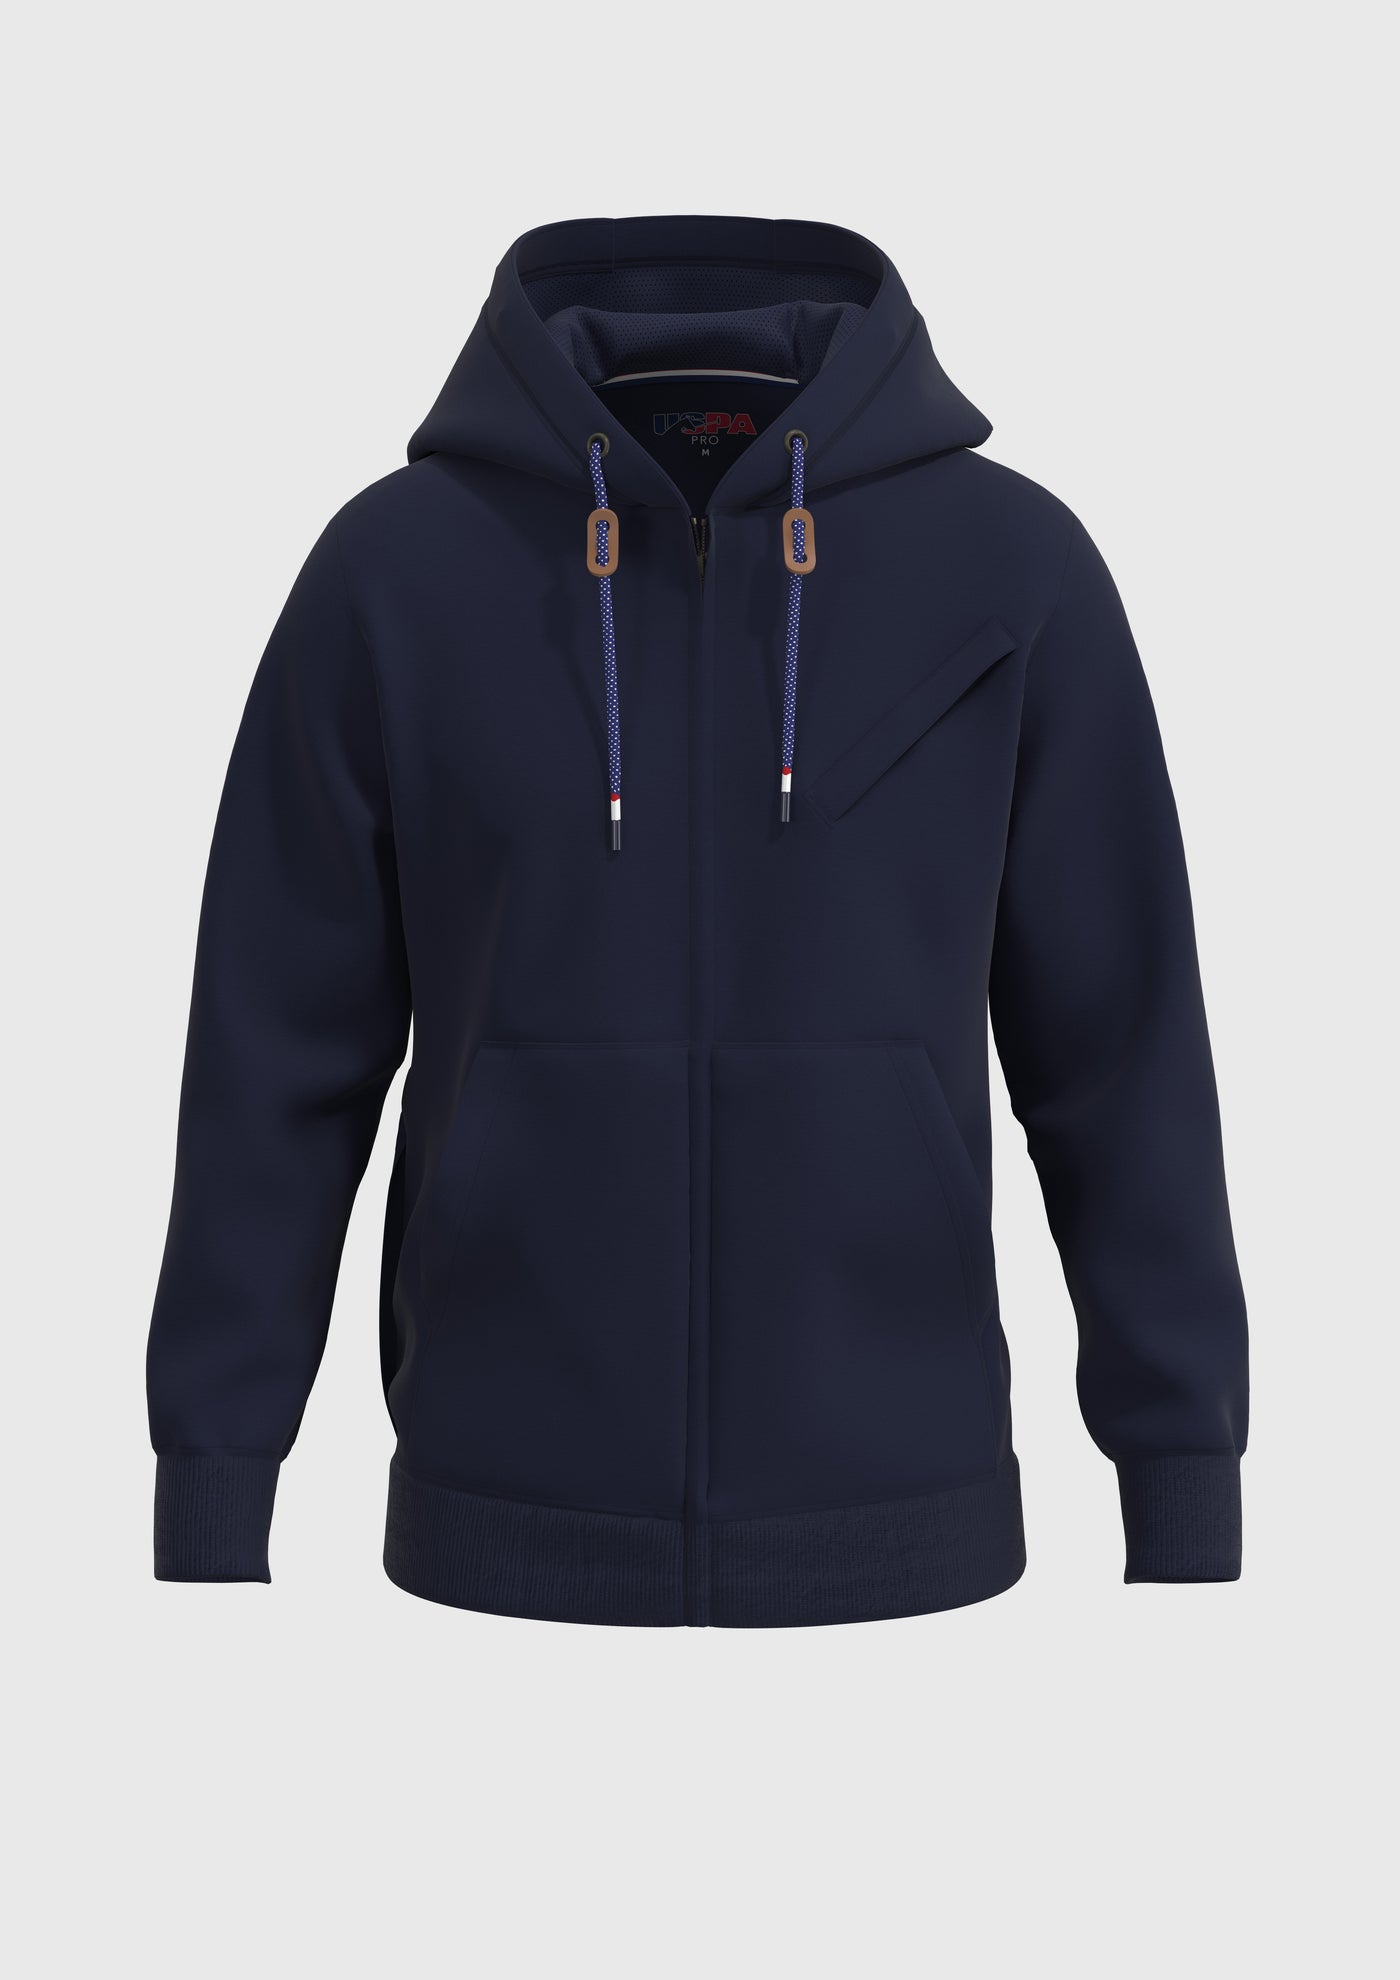 PERFORMANCE HOODIE - IN NAVY OR WHITE